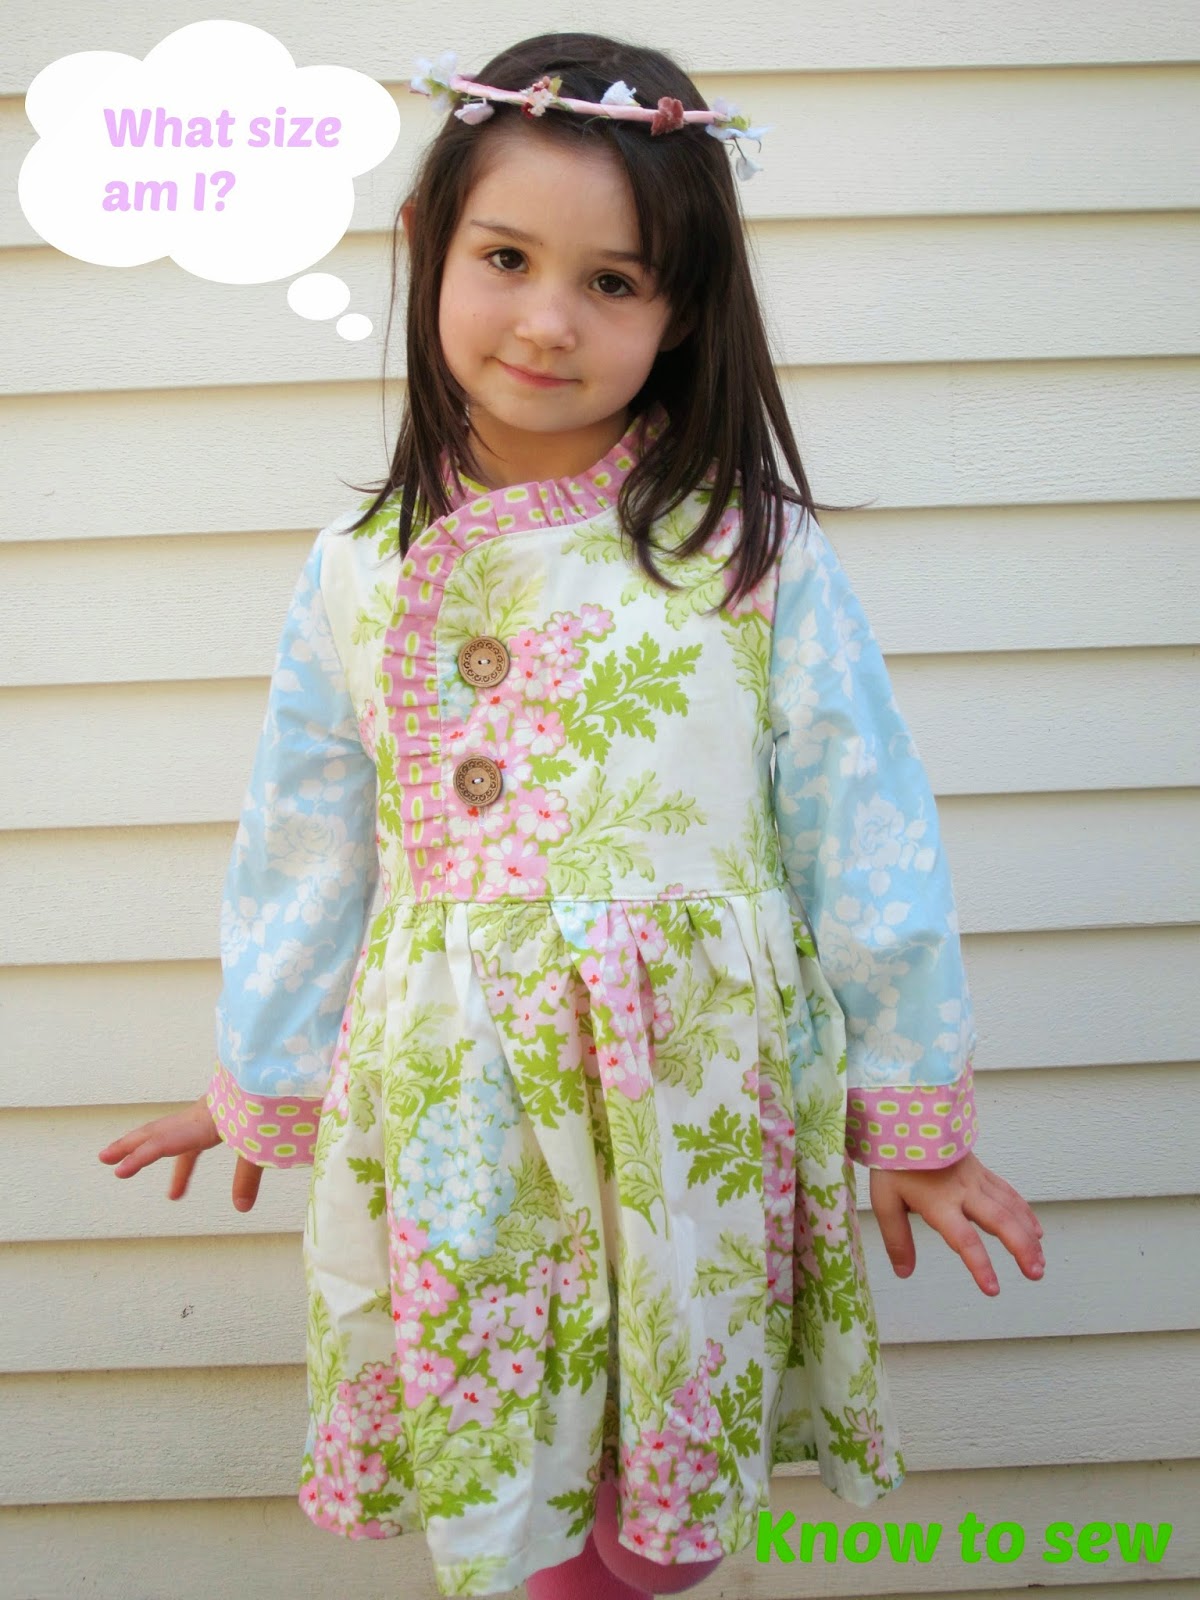 handmade dress haven: Know to sew